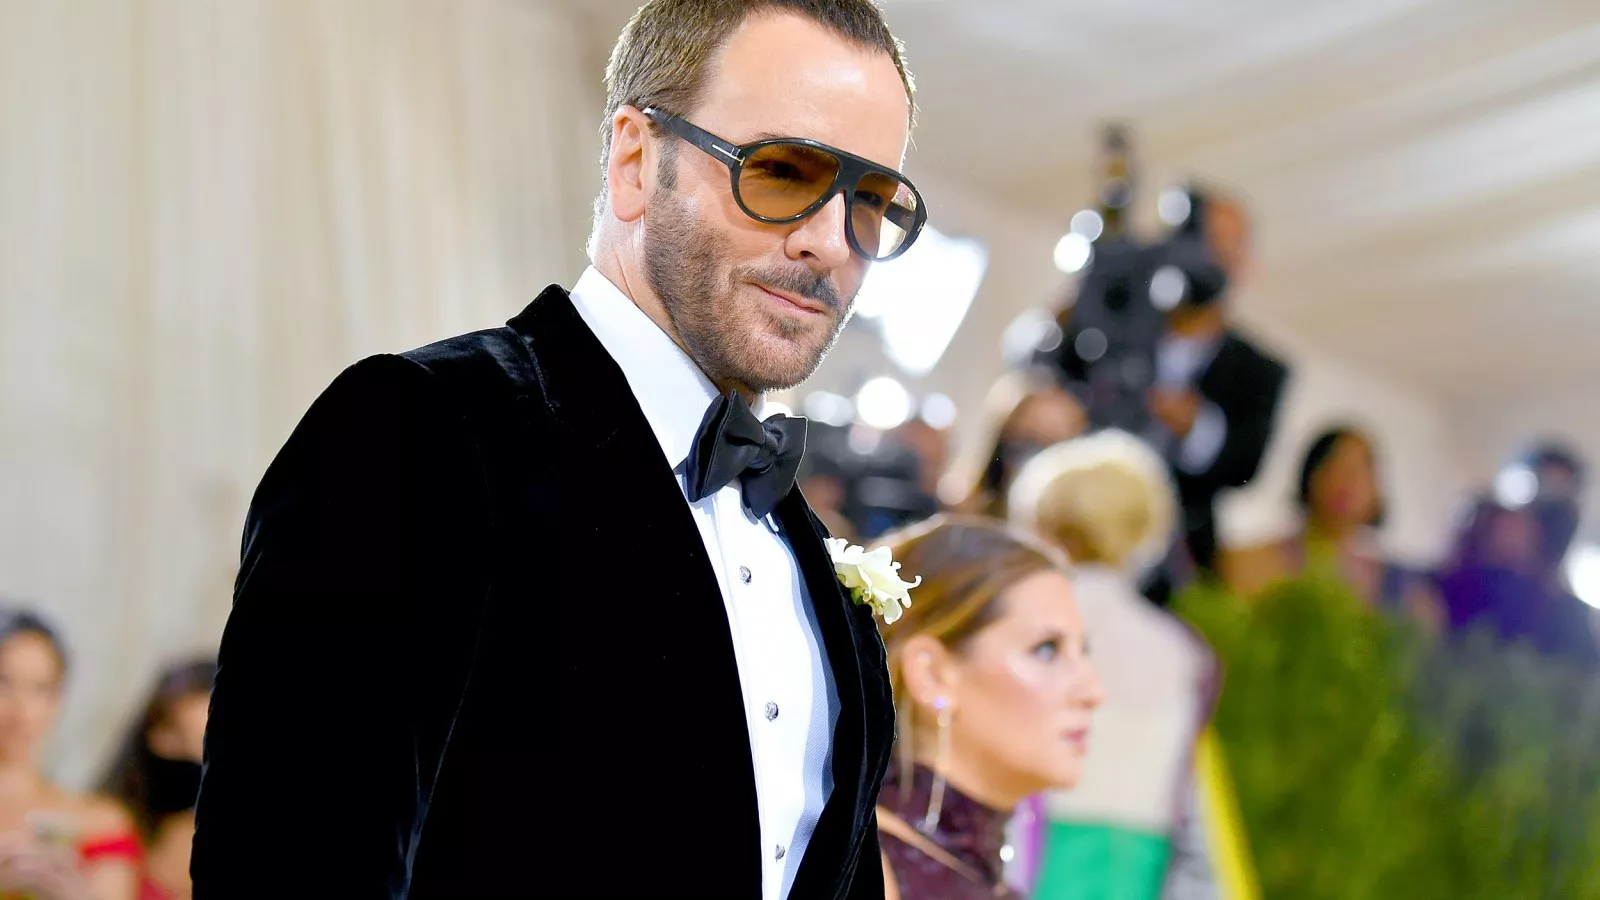 Is Tom Ford Selling His Namesake Co. to Gucci—Where He Got His Start? -  LAmag - Culture, Food, Fashion, News & Los Angeles